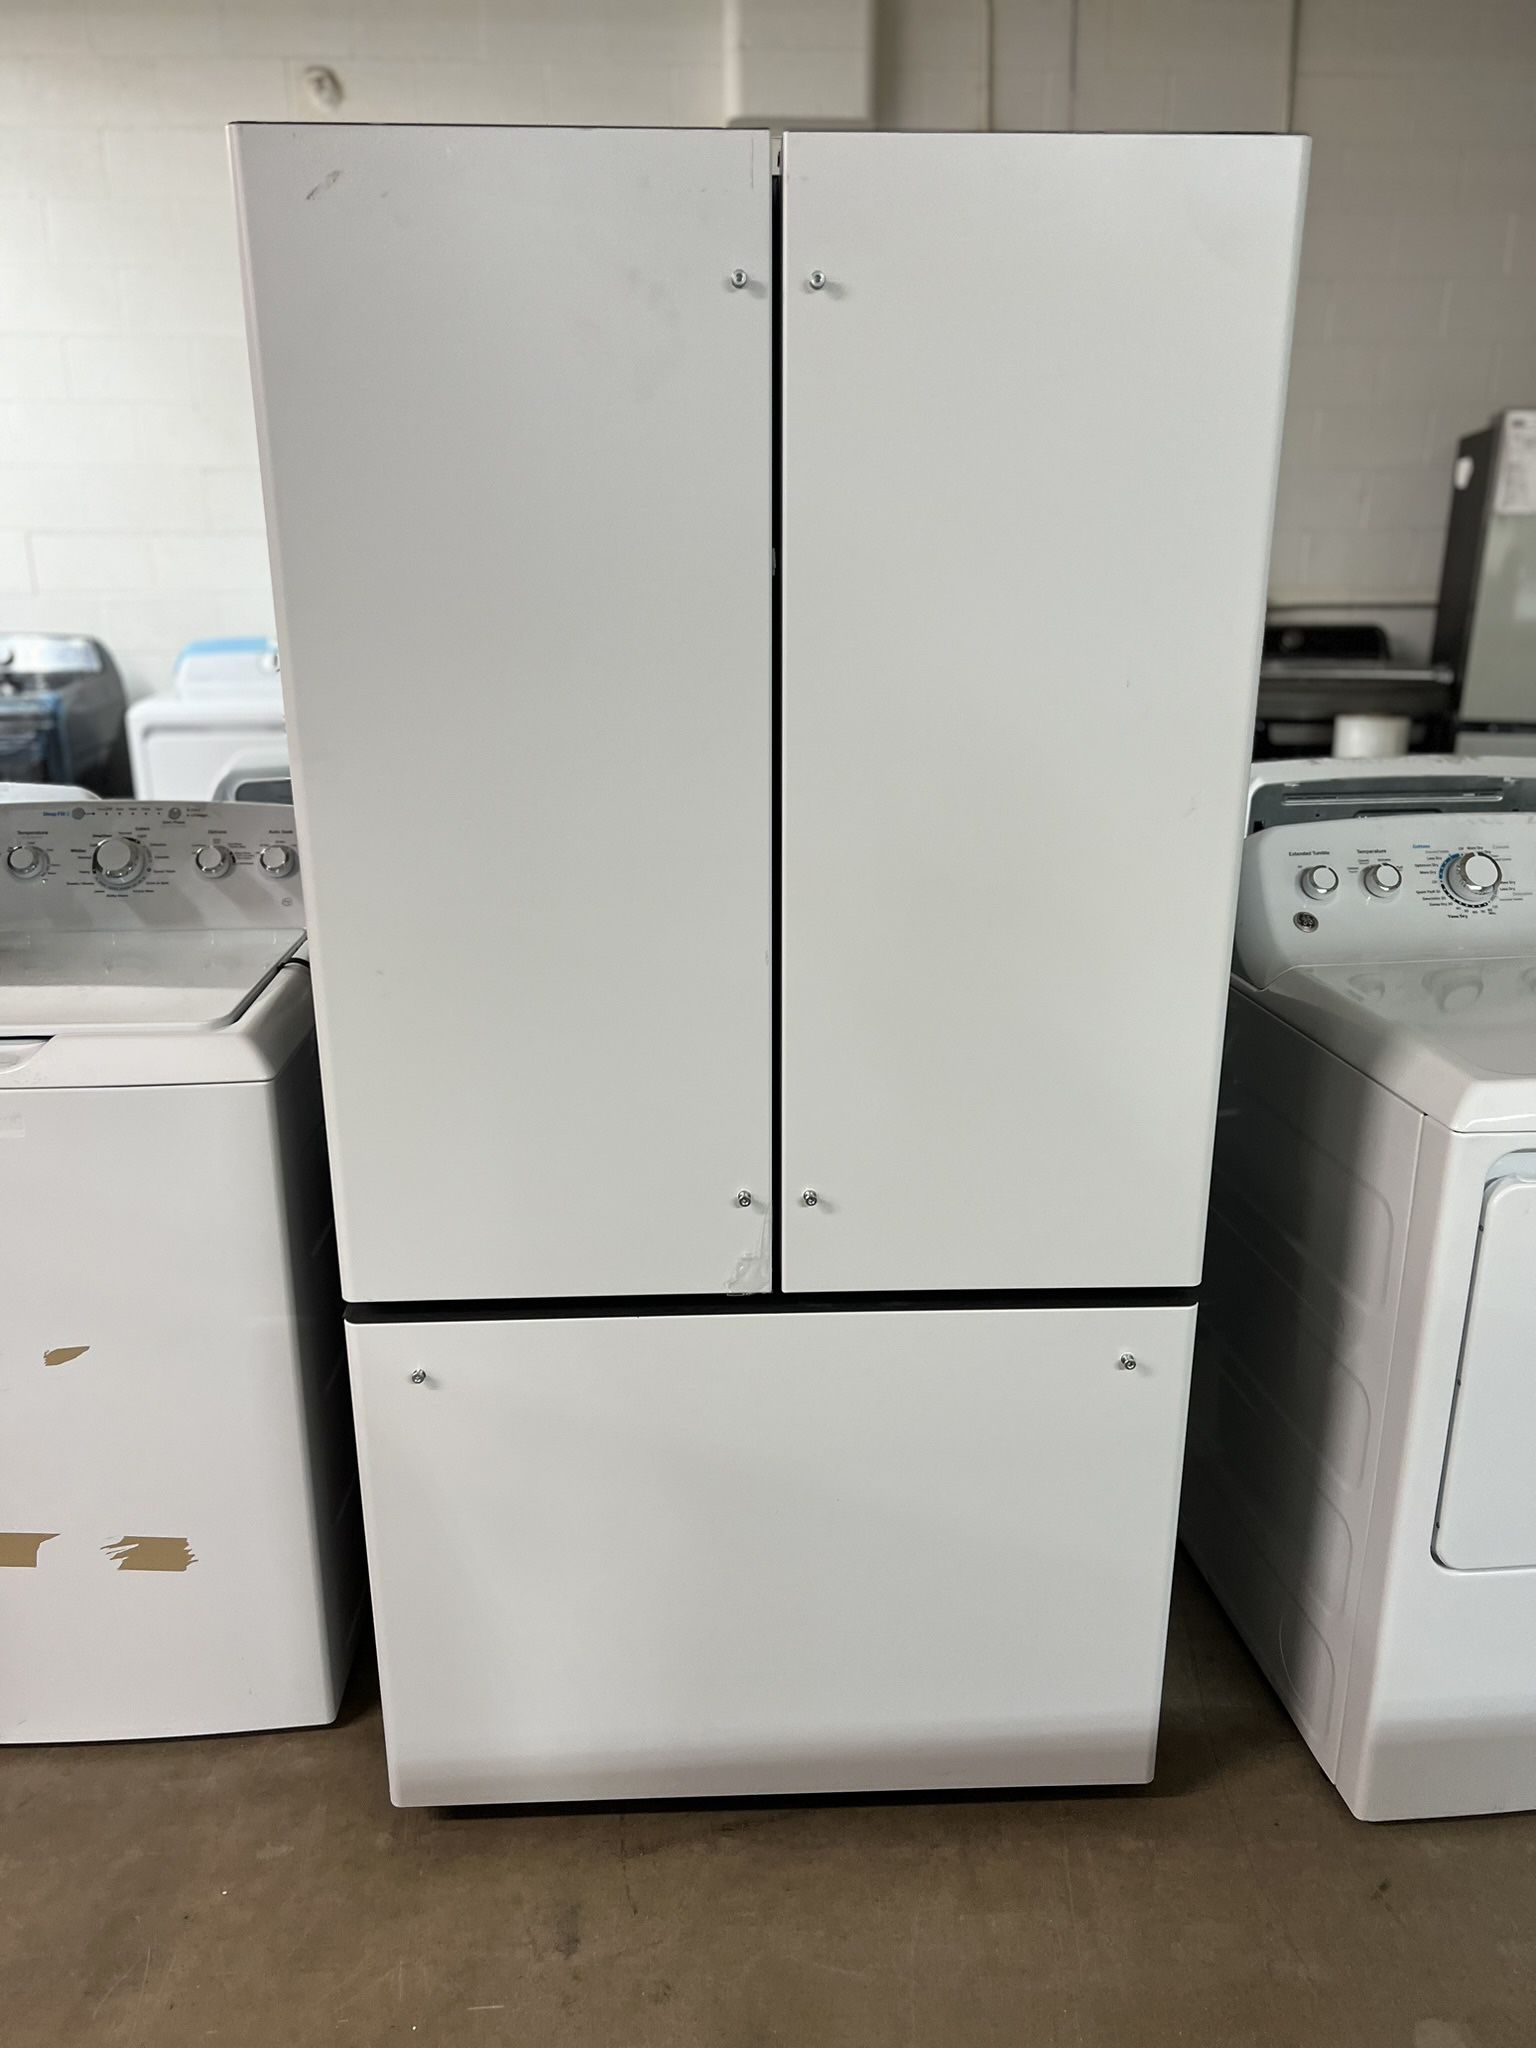 CAFE FRENCH DOOR REFRIGERATOR WHITE